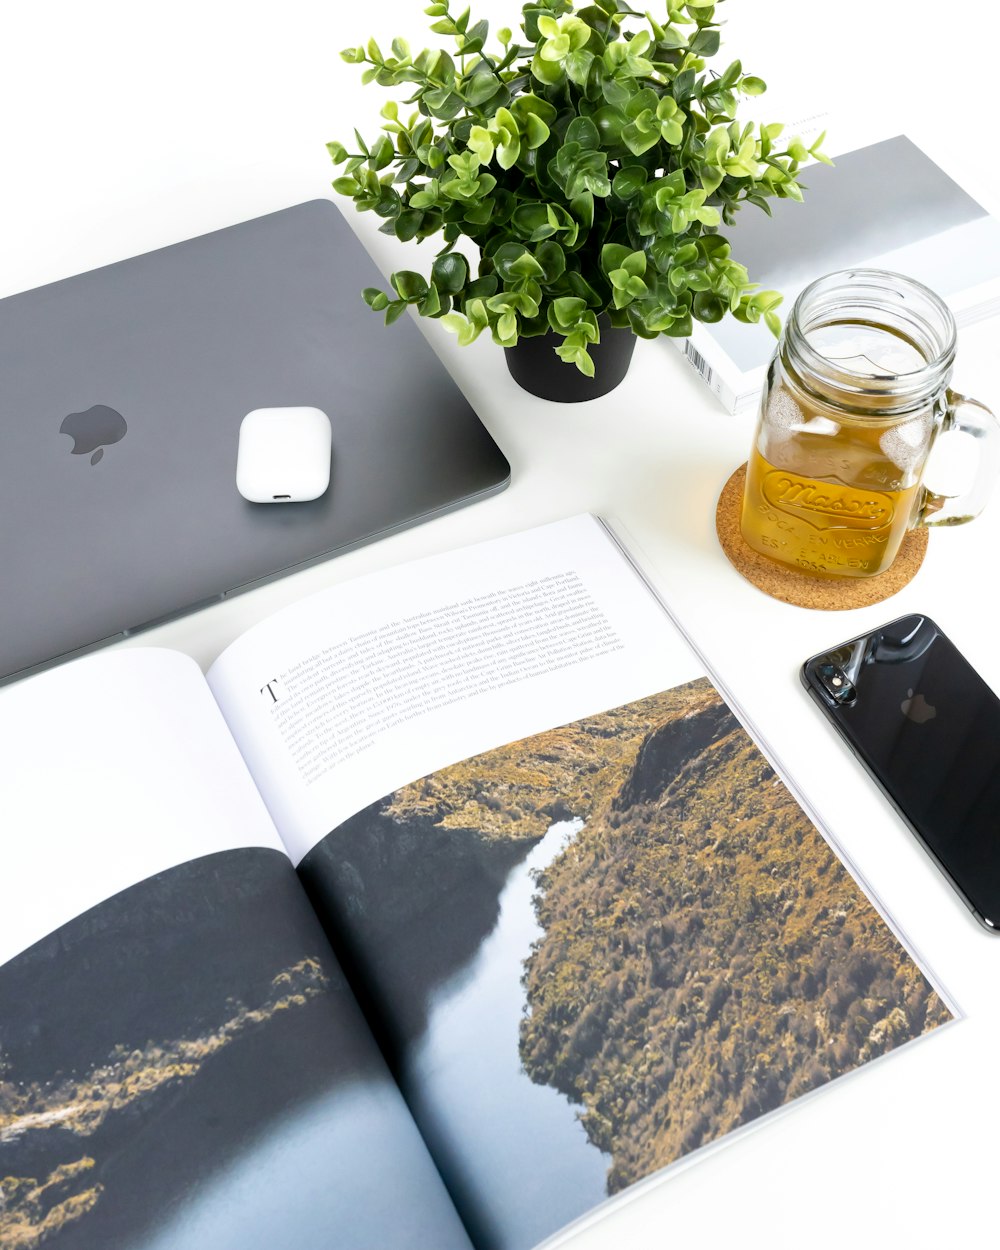 half-empty clear glass jar beside green-leafed plant, MacBook, and space gray iPhone X